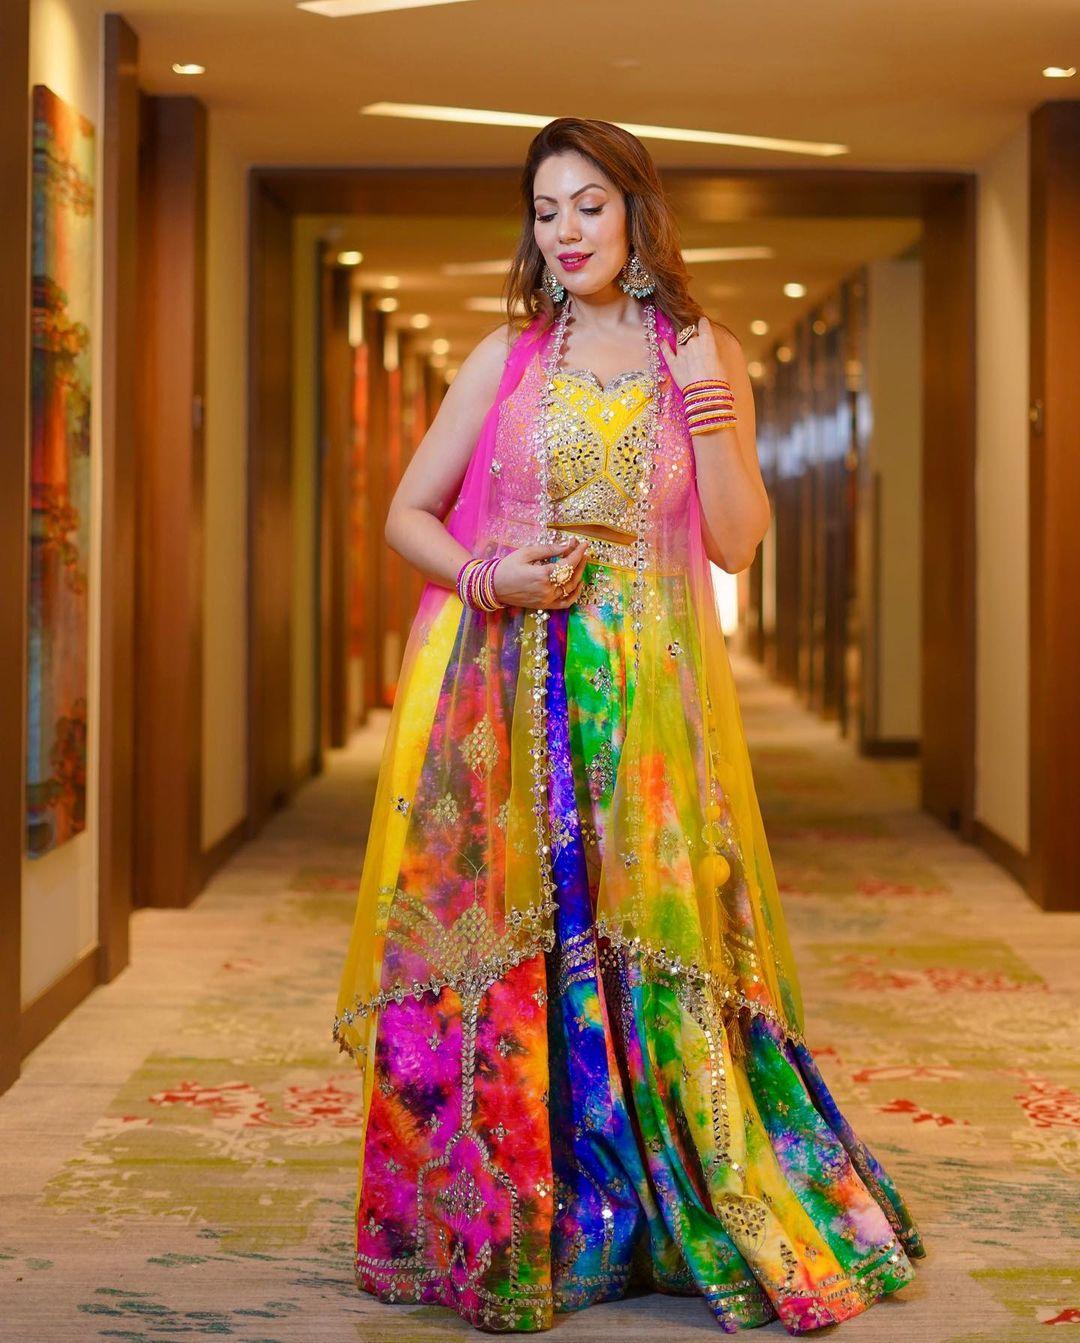 Hues of multi-colours and open hair are all that this wedding season calls for. The lehenga worn by Munmun is not too heavy but gives a rich look